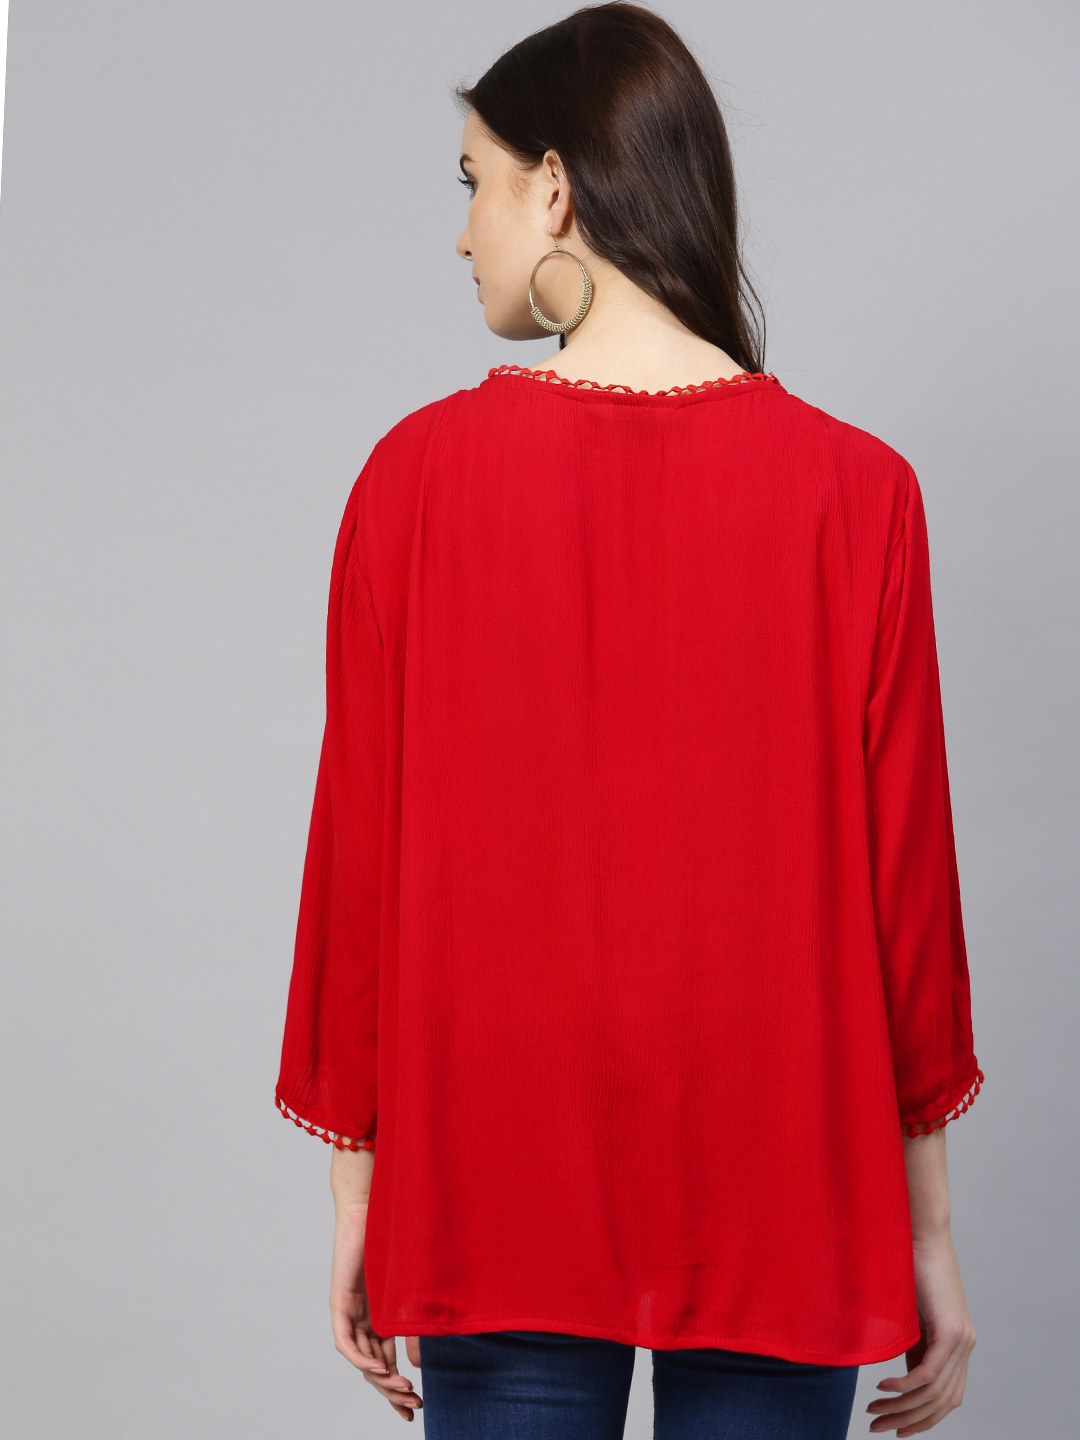 Women's  Red Embroidered Detail A-Line Top 2 - Wahe-NOOR